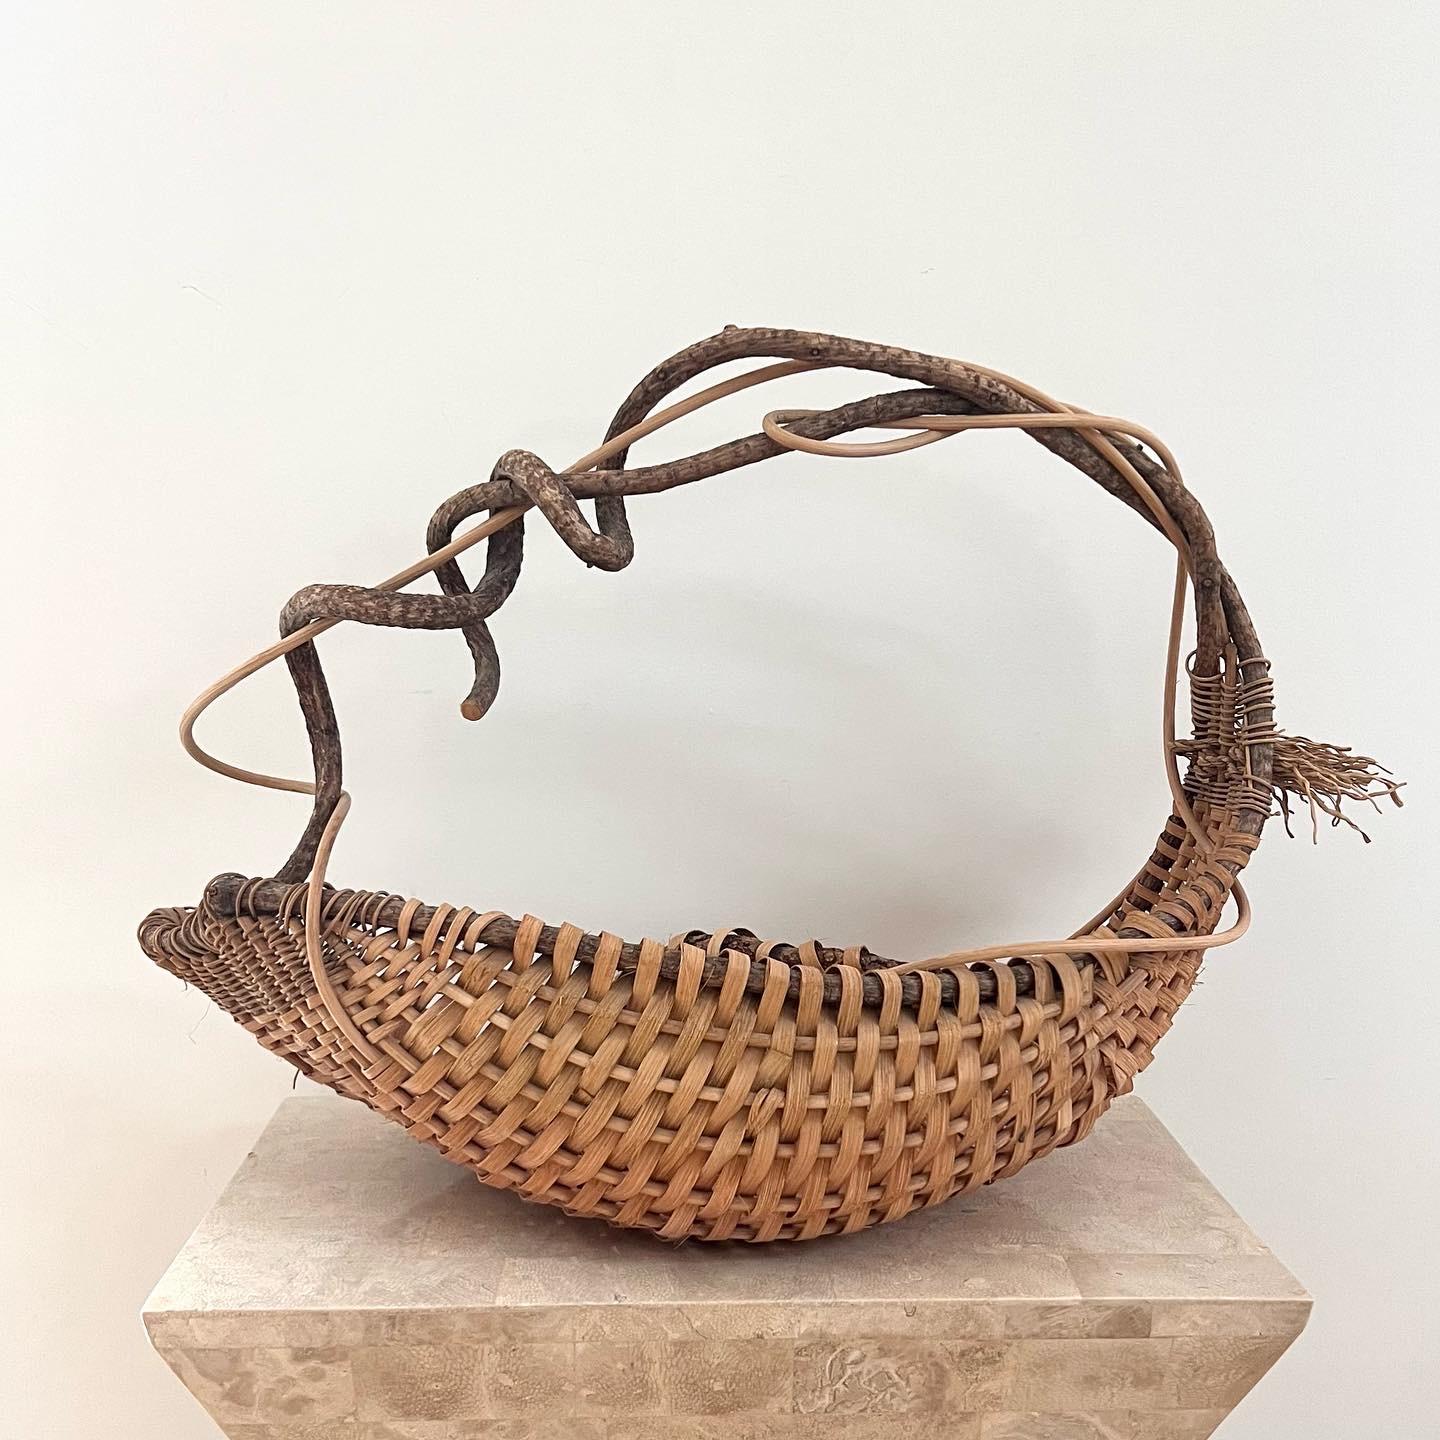 Hand-Woven Vintage Handwoven Wicker and Wood Decorative Basket by Artist, Late 20th Century